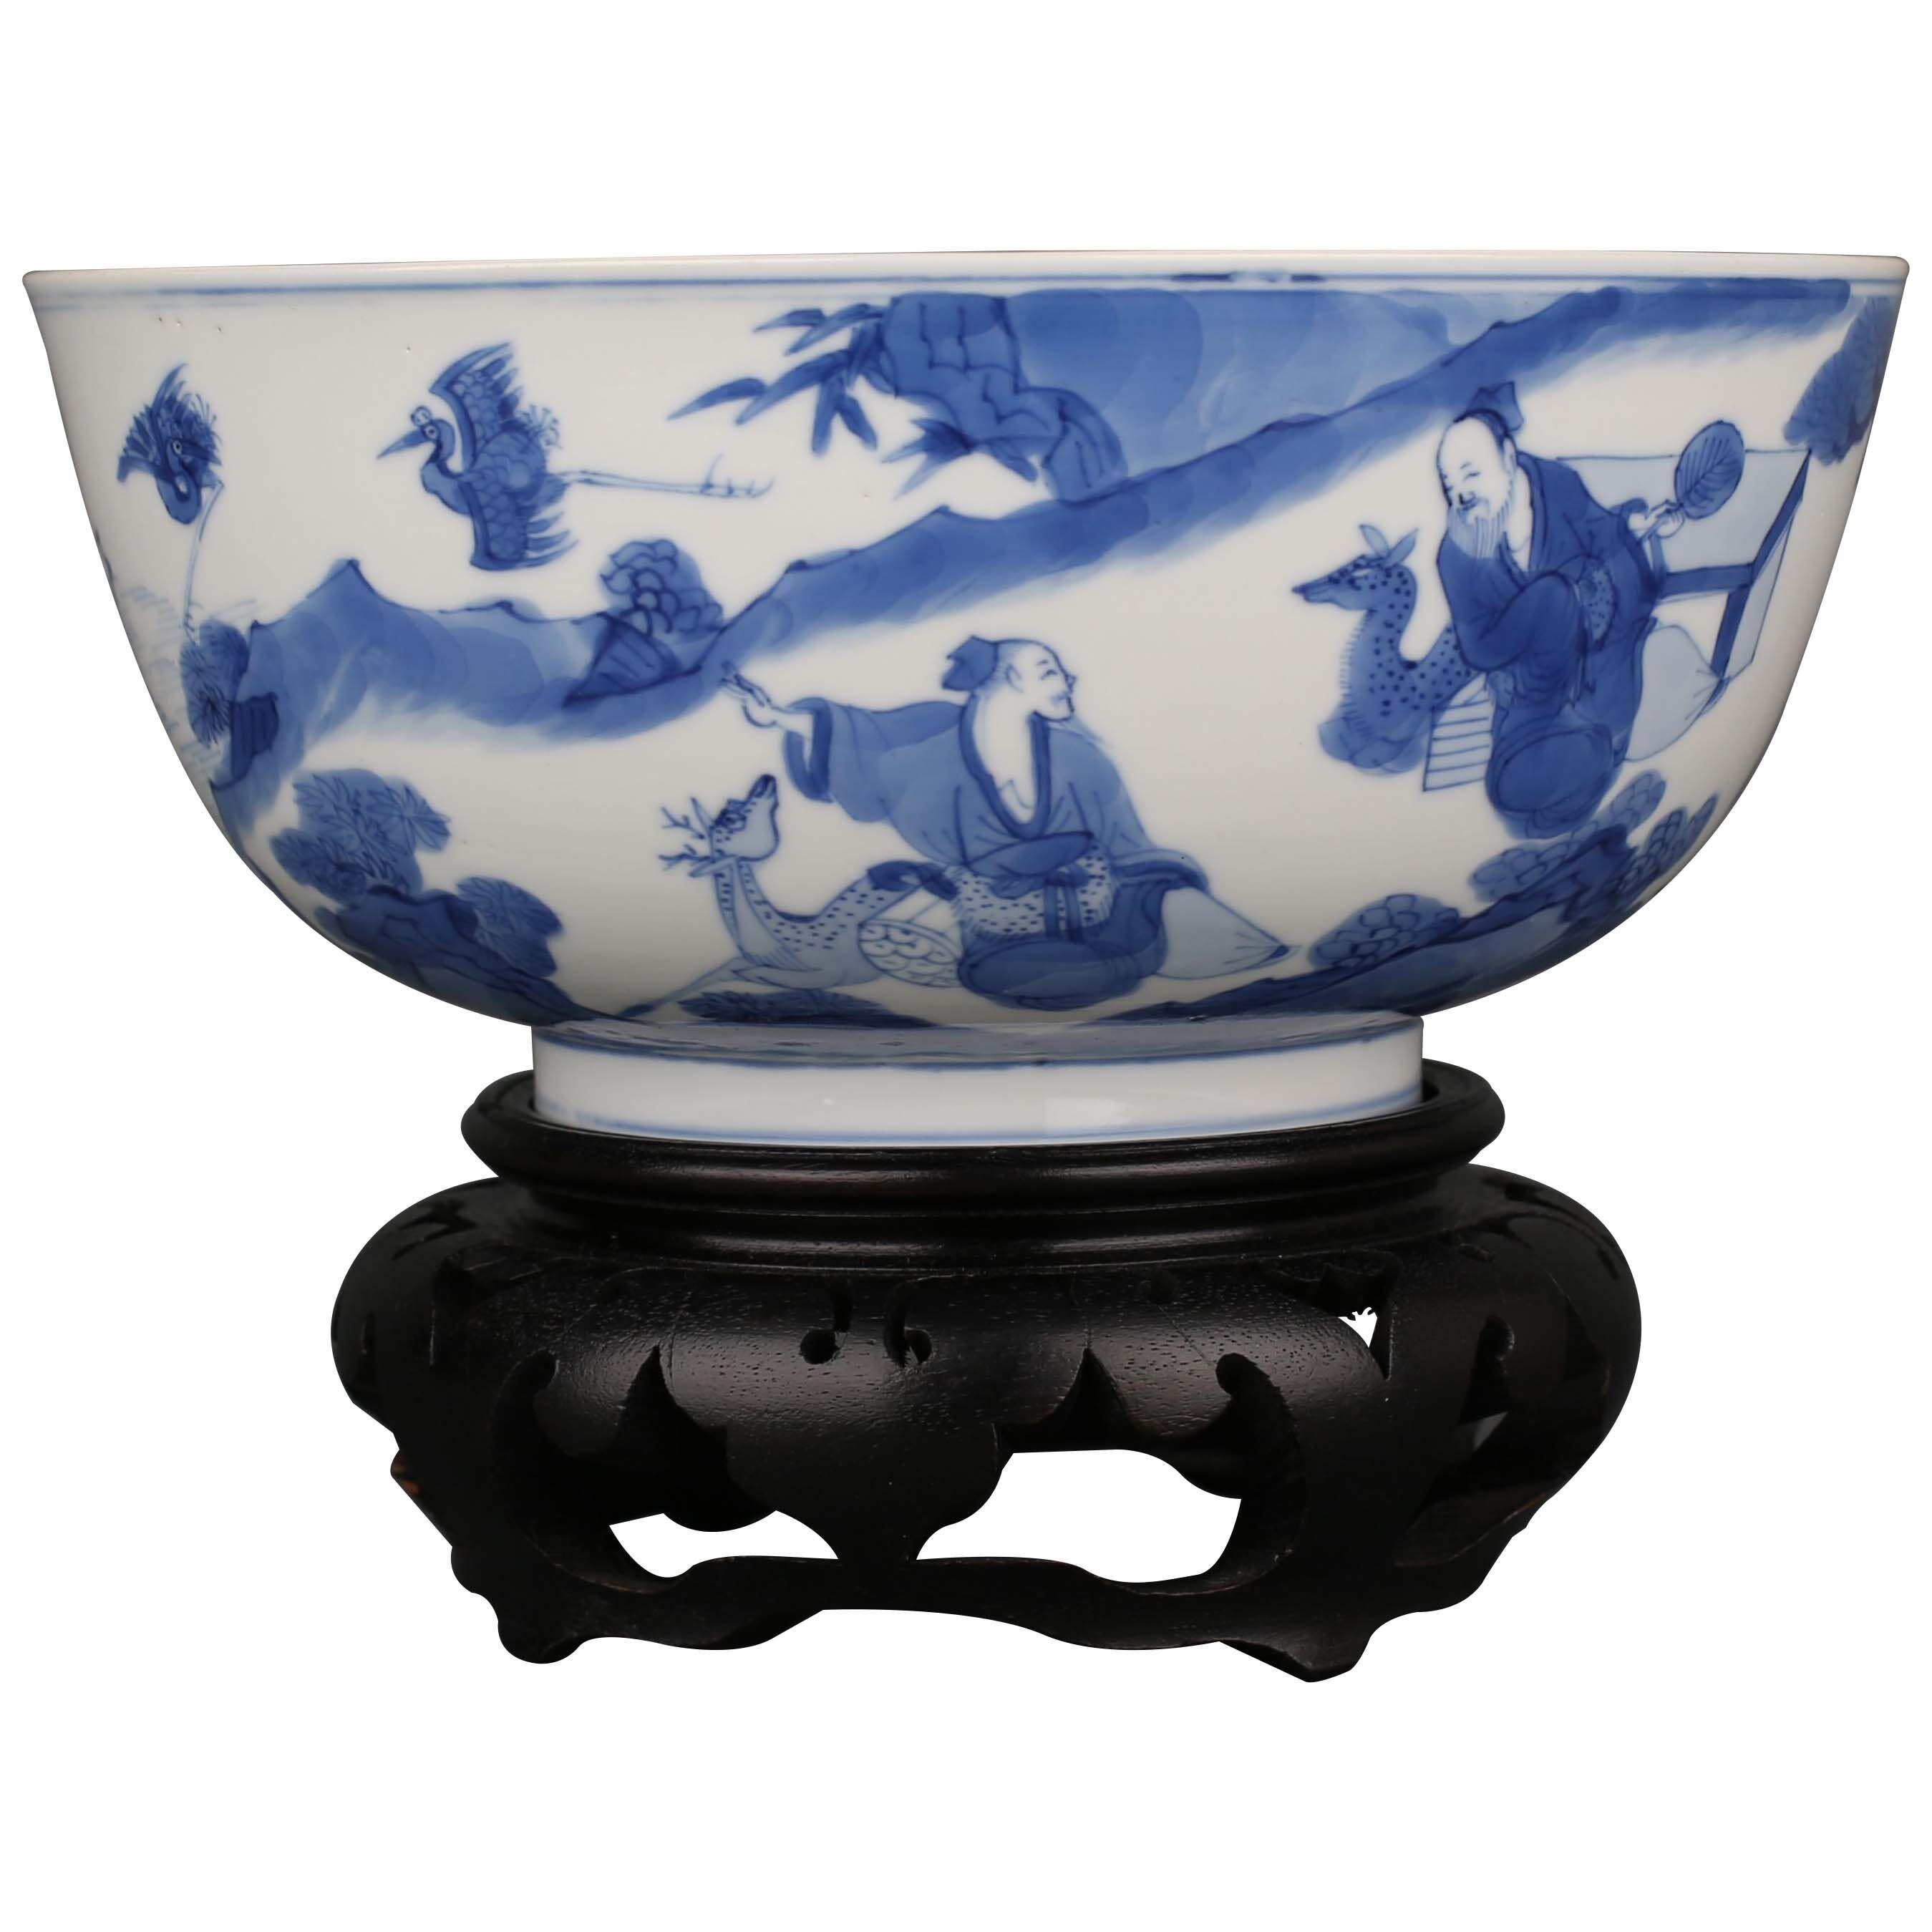 A Chinese porcelain blue and white deep bowl